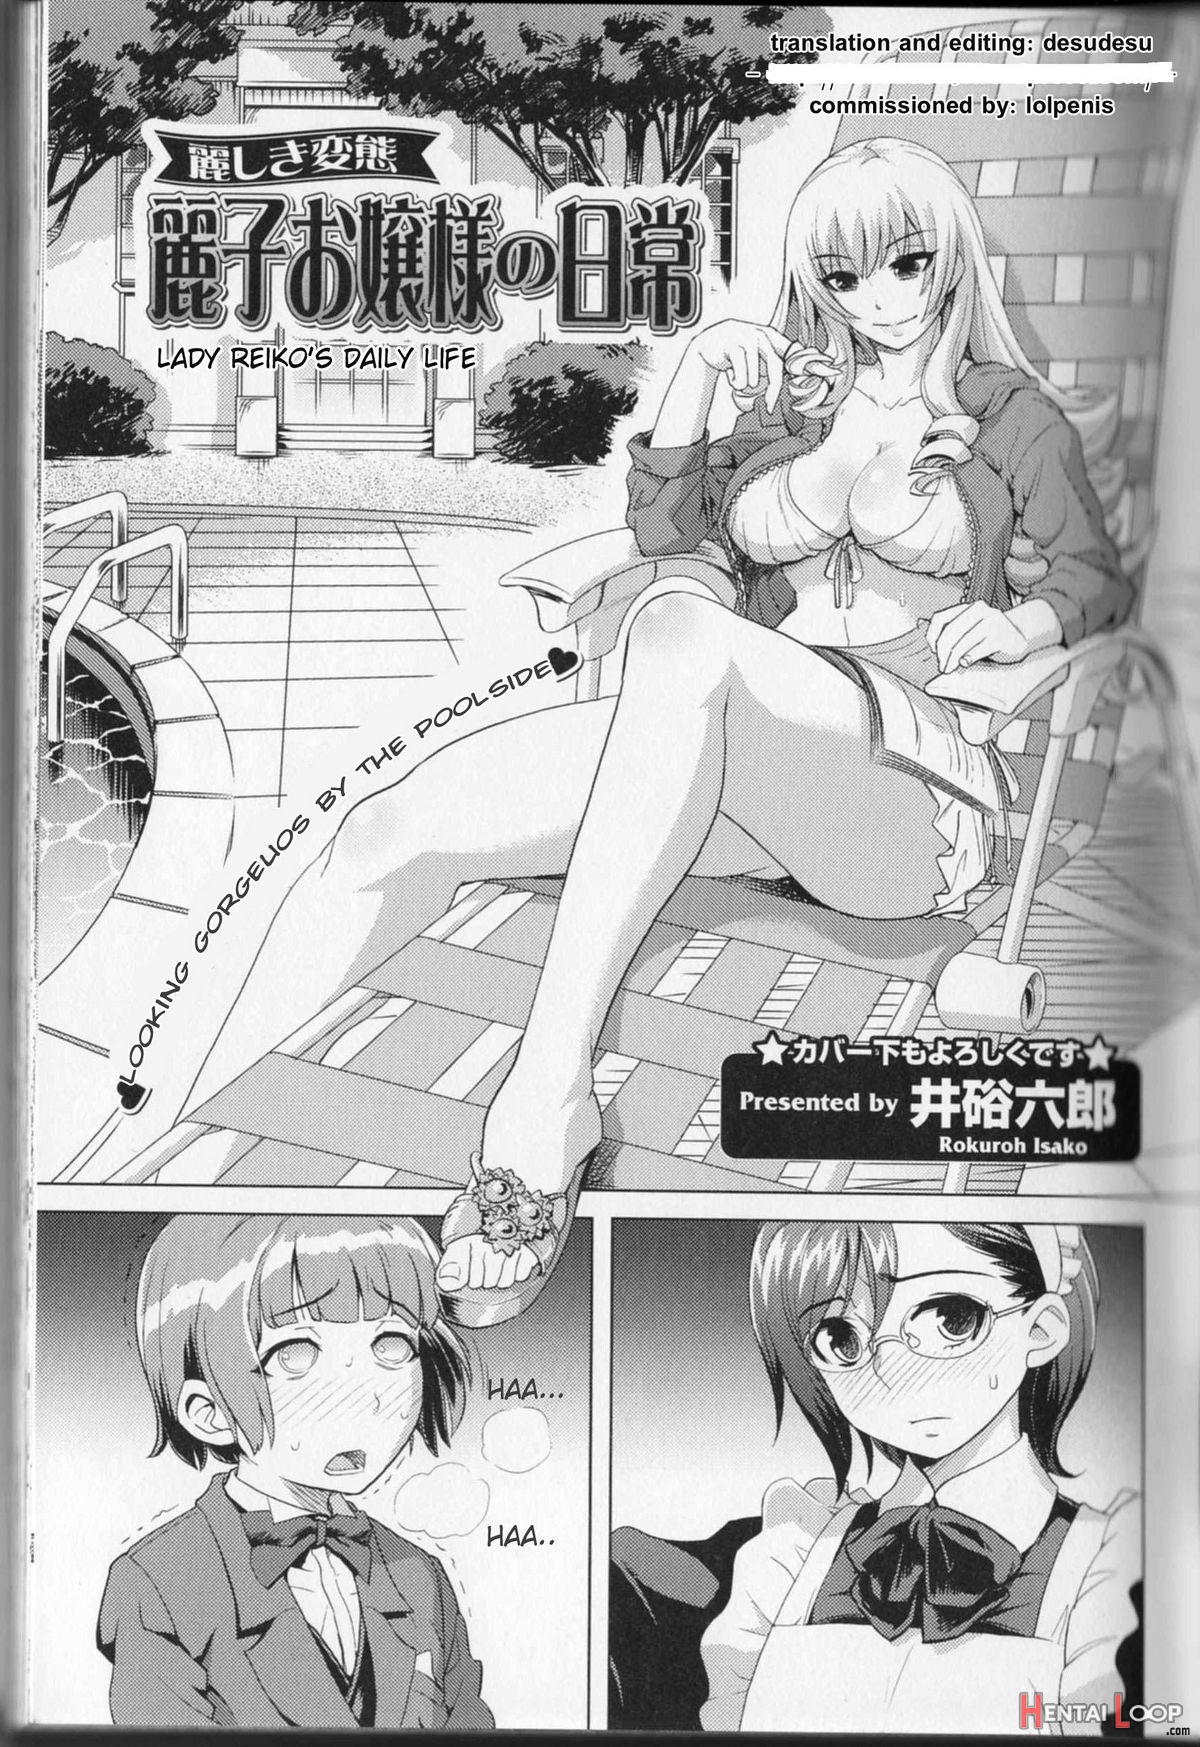 Lady Reiko's Daily Life page 1